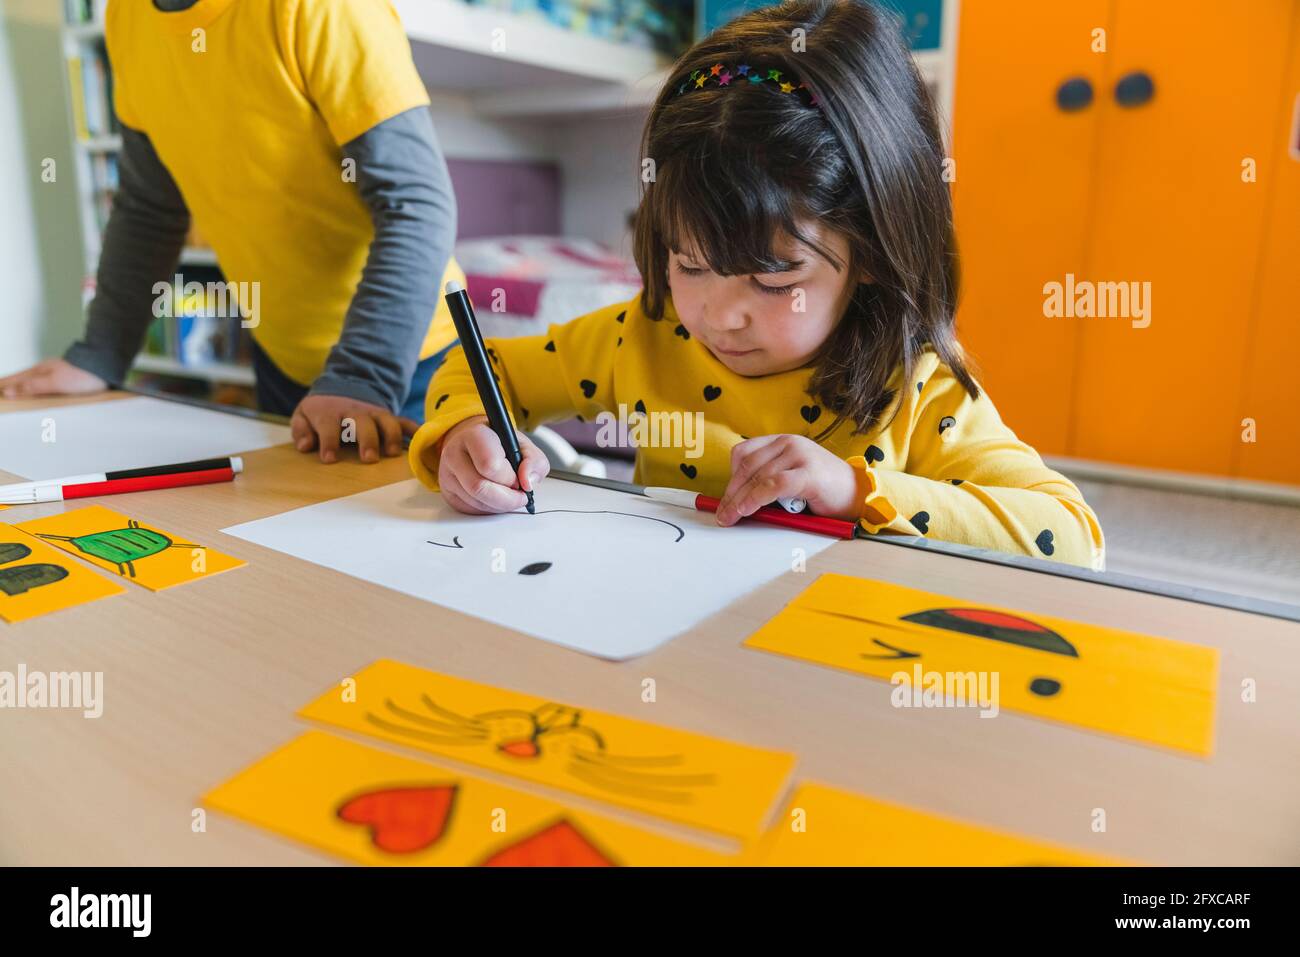 Girl drawing smiley face on paper while playing at home Stock Photo